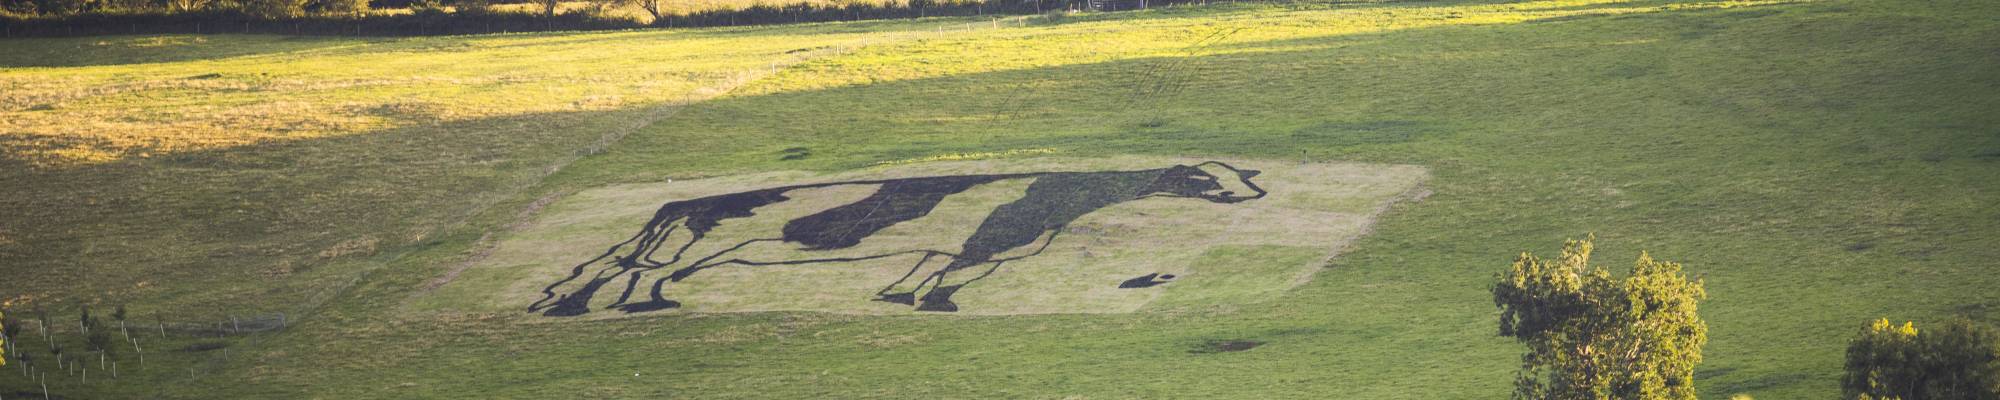 Yeo Valley organic make a giant cow on the hill out of cow poo